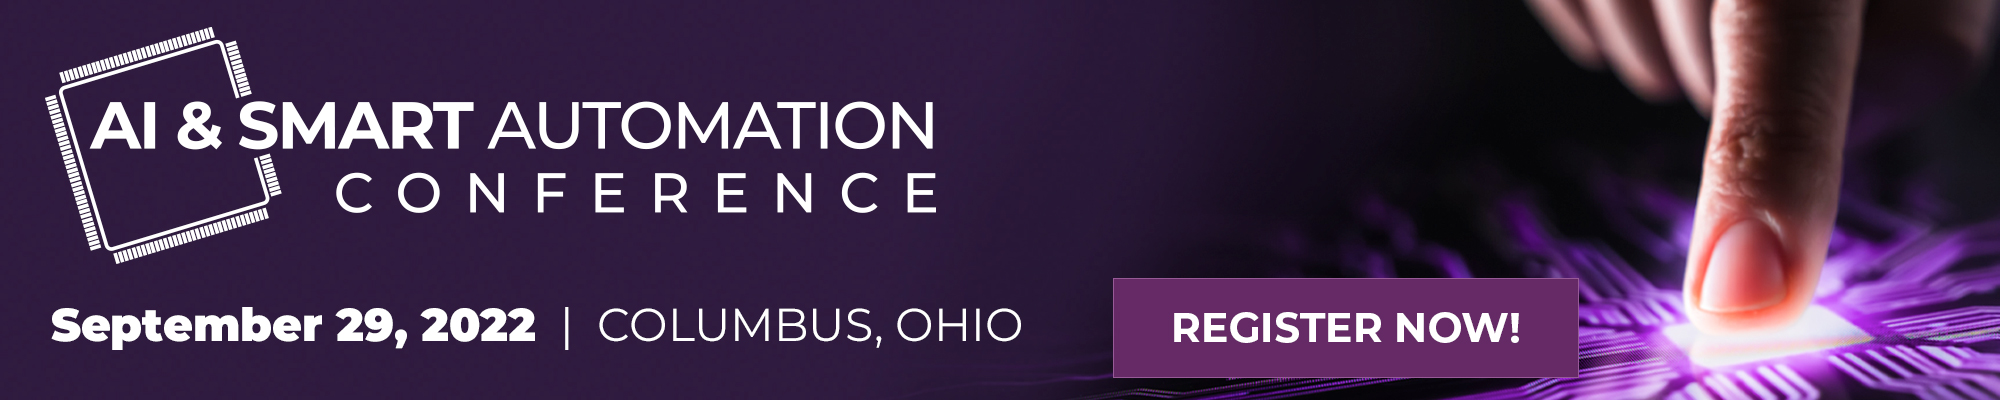 AI & Smart Automation Conference - September 29, 2022 - Columbus, OH